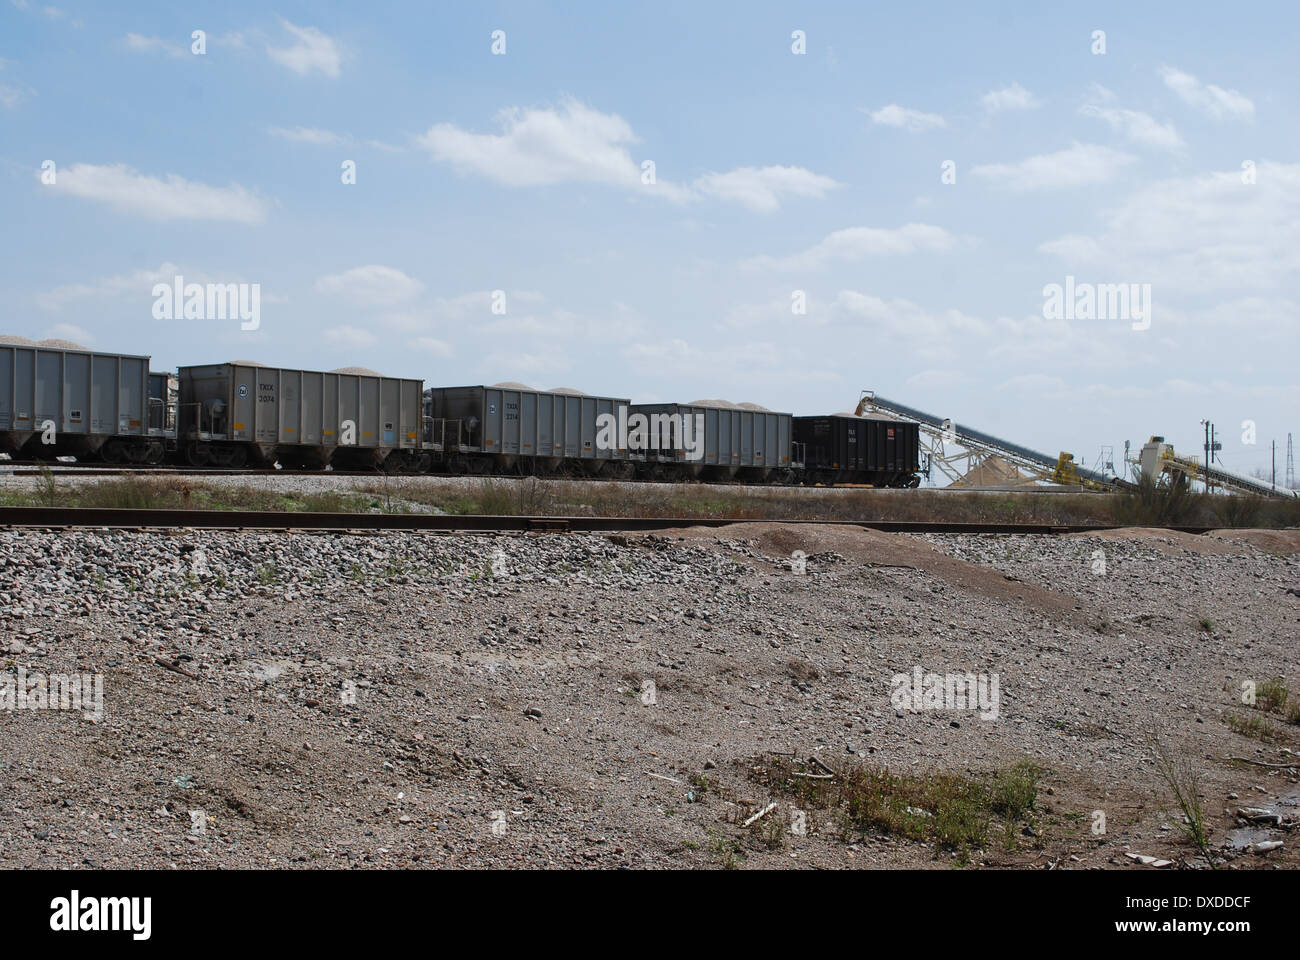 Texas Industries to merge with Martin Marietta Corporation in second quarter 2014. The TXI rail cars are being loaded  here. Stock Photo